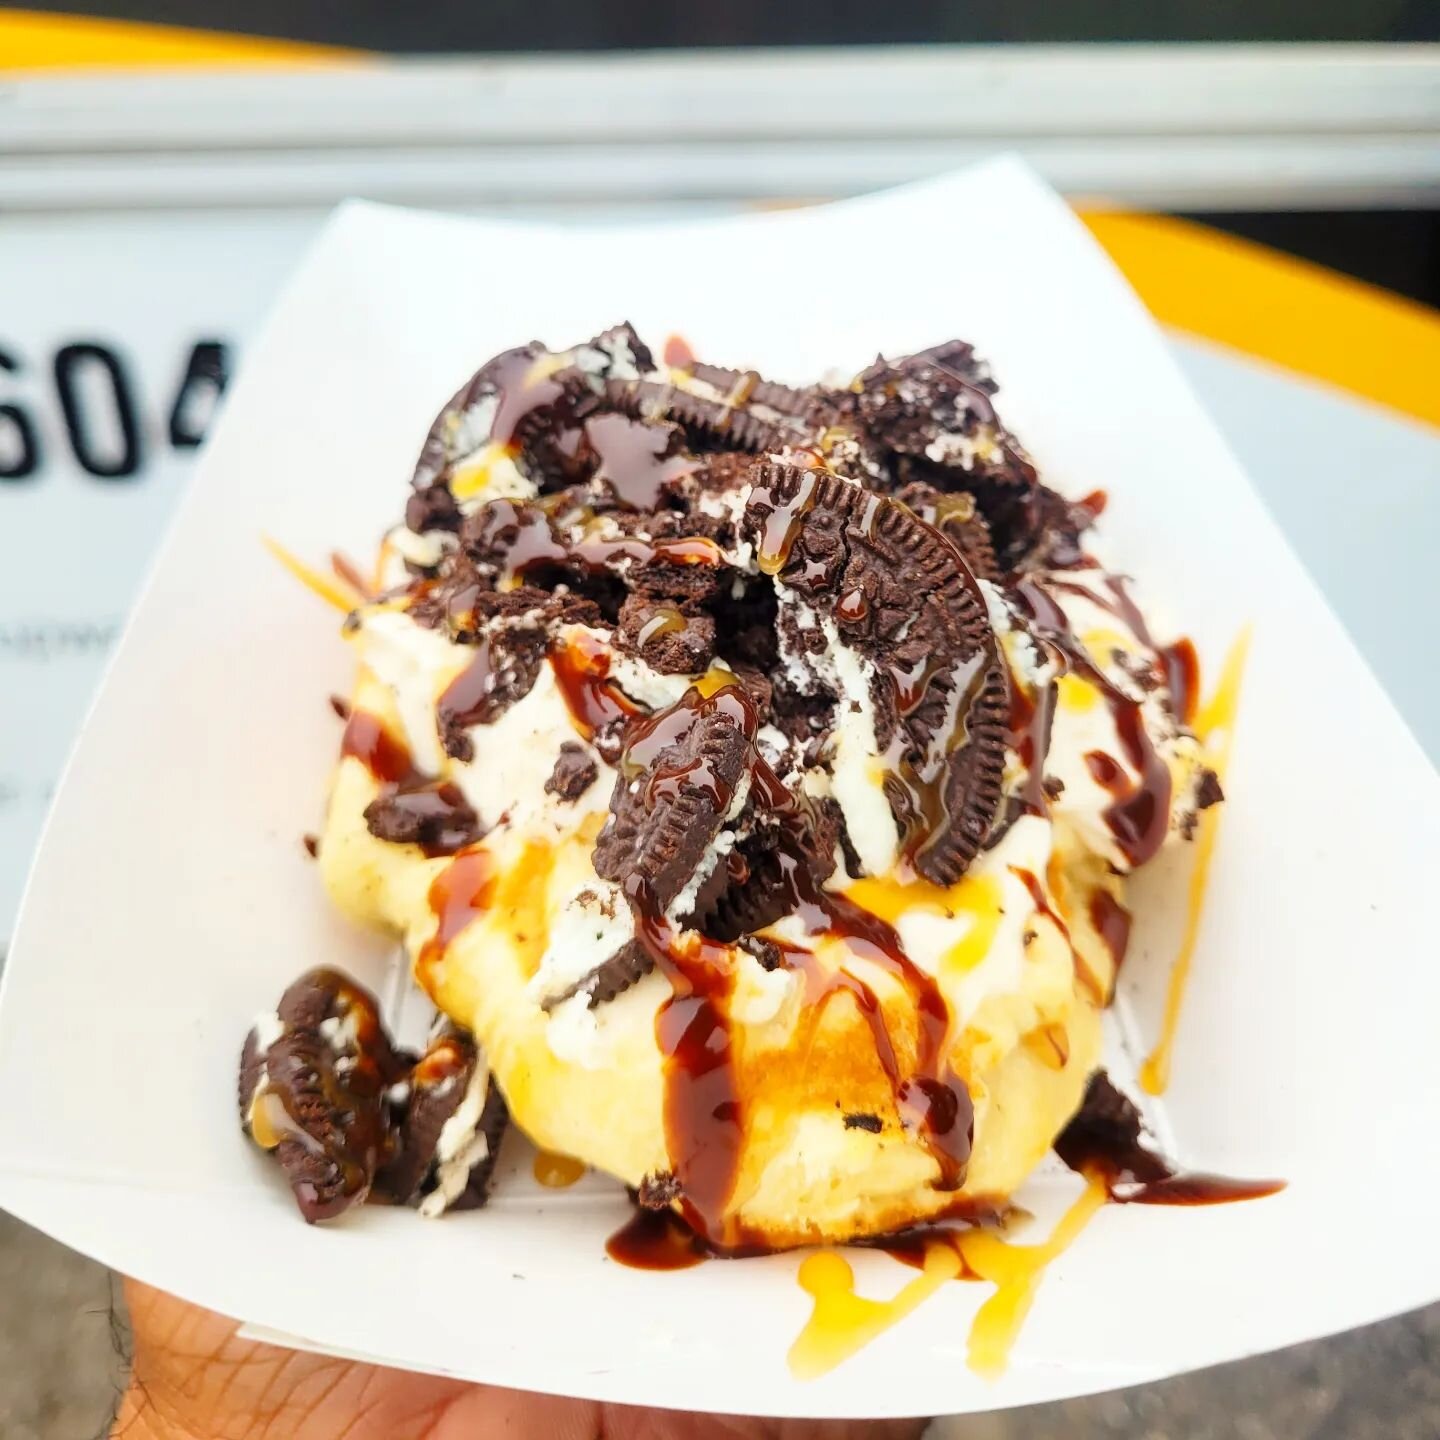 Ask us about our New Caramel Oreo Cheesecake special 😋 🧇 

#waffles #foodie #foodphotography #foodtrucks #smallbusiness